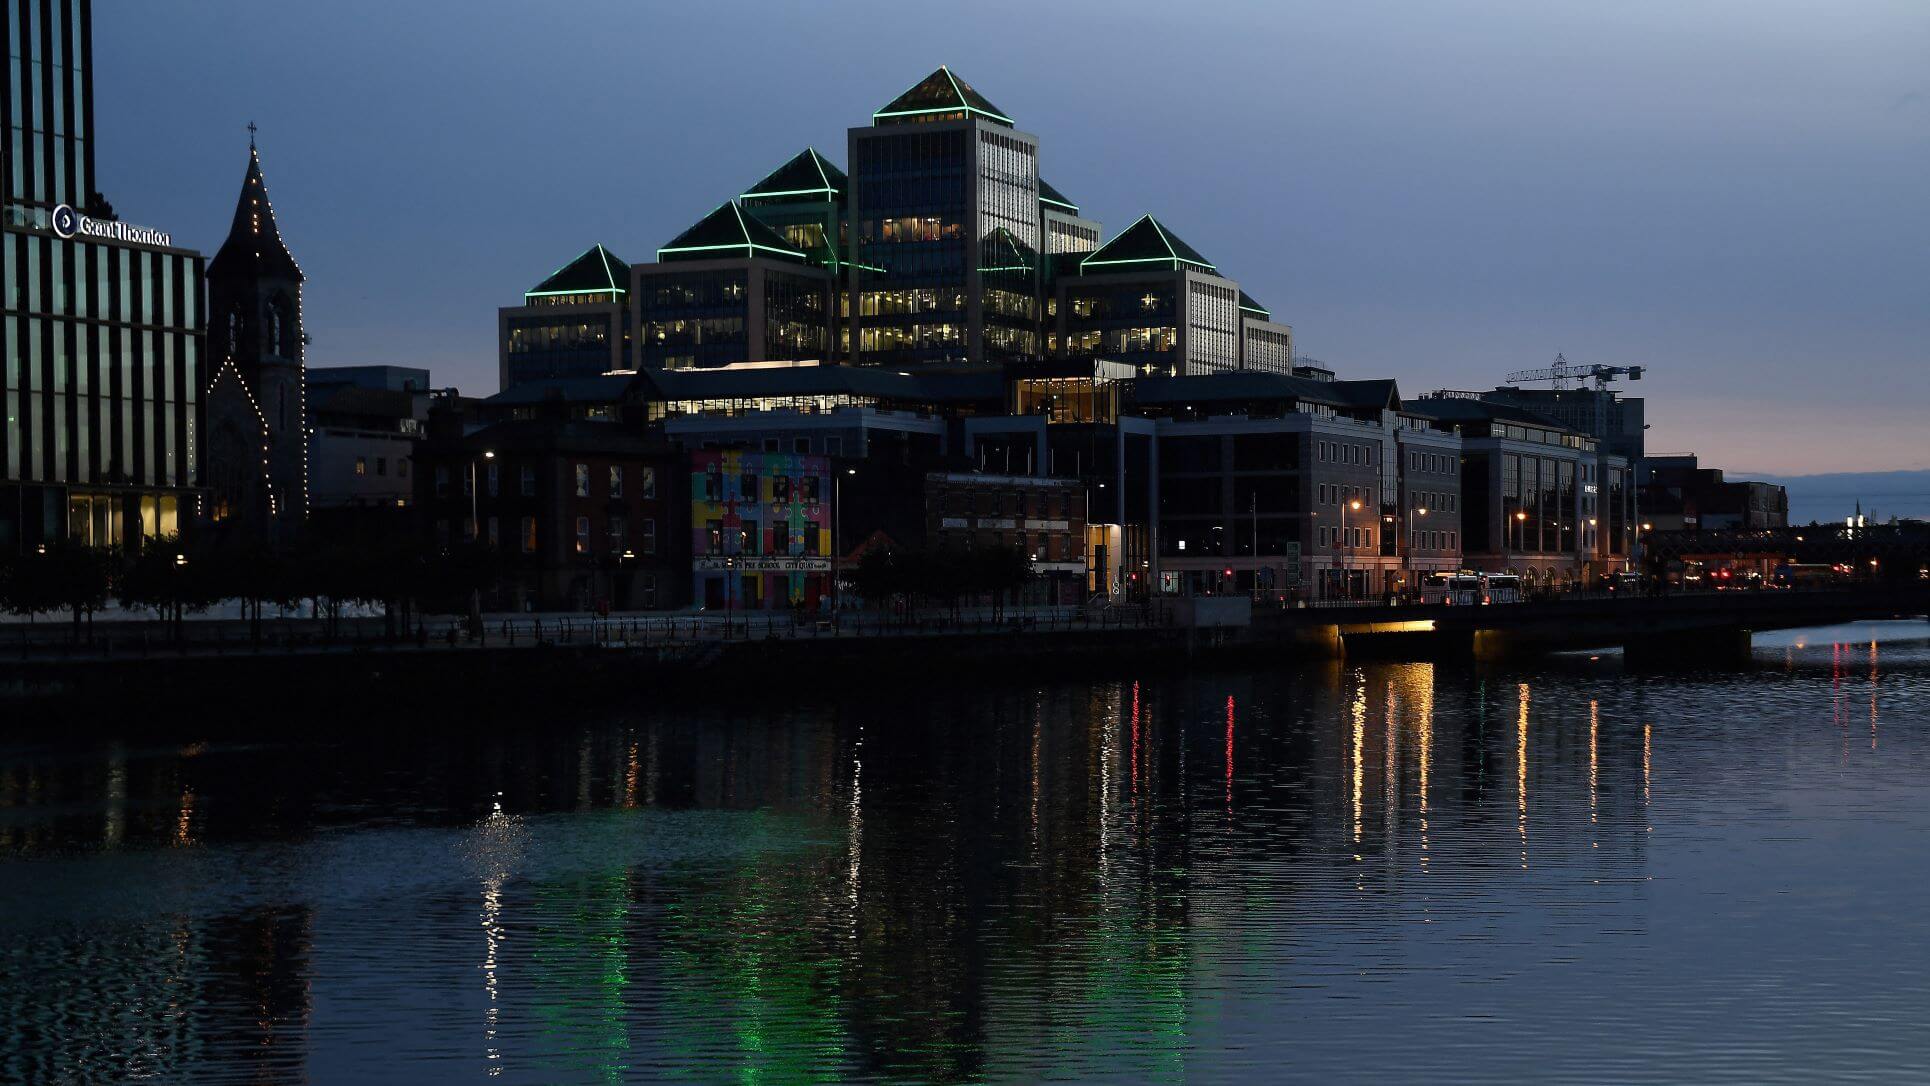 Foreign Business Travel Missing Ingredient For Irish Hotel Recovery - Dalata